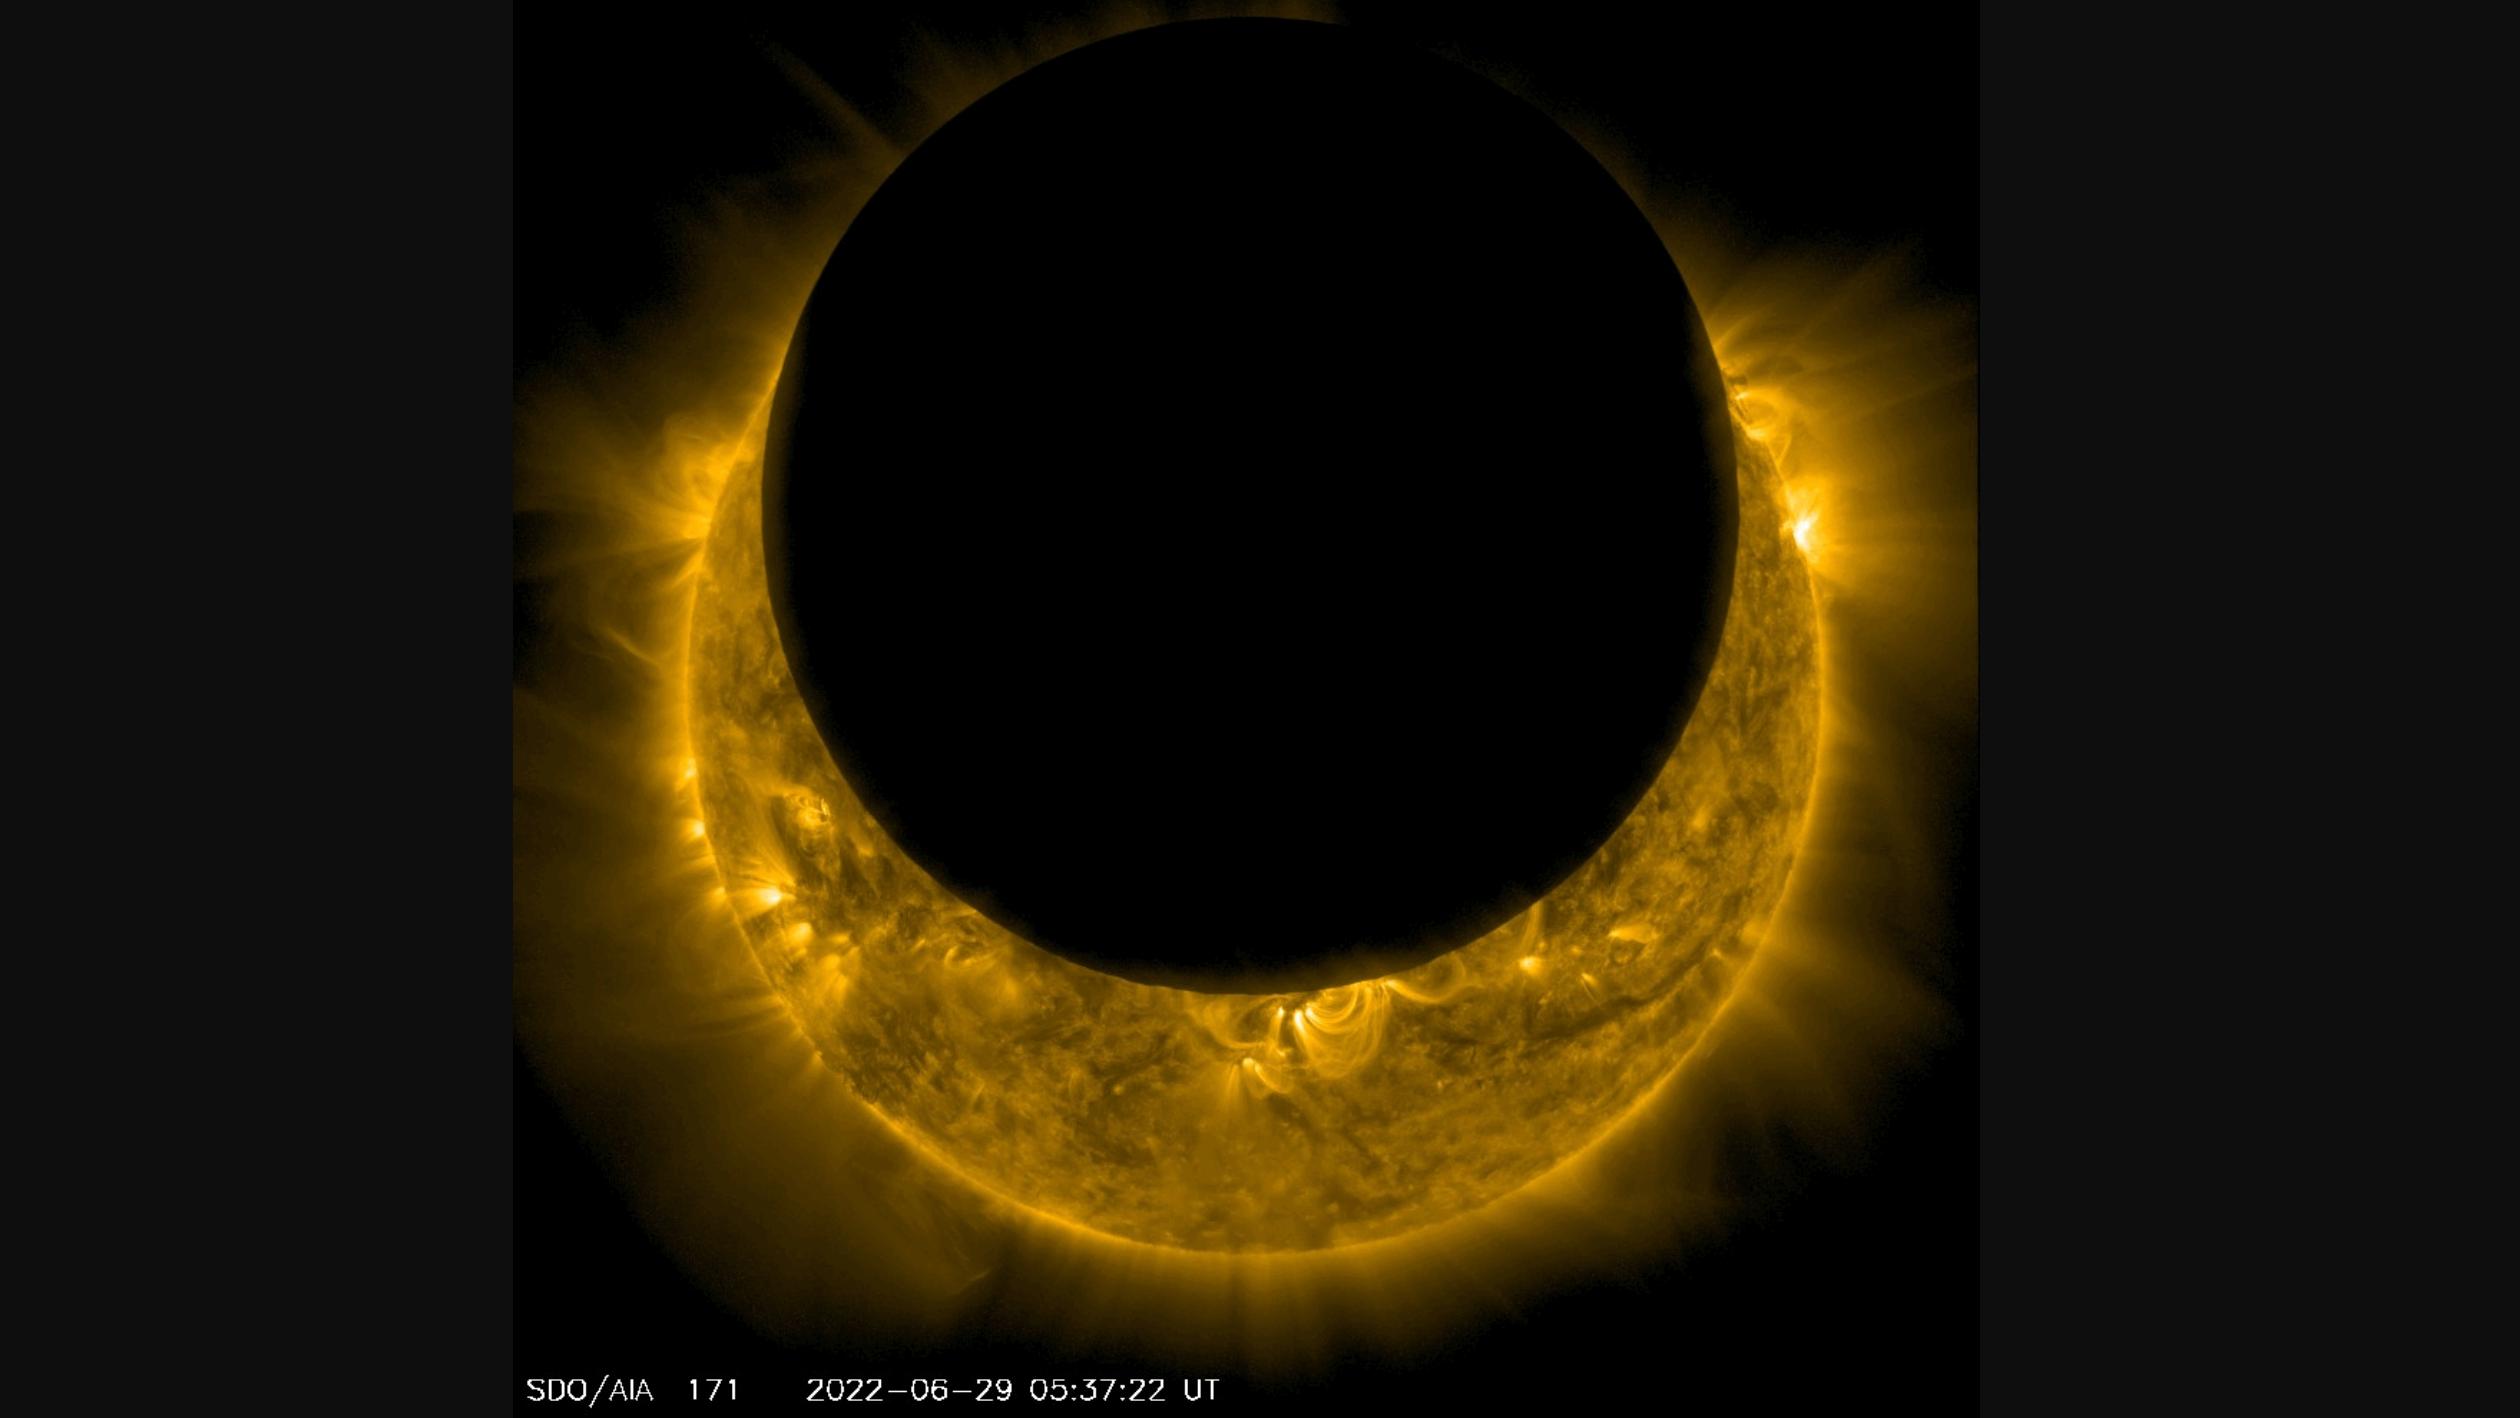 Mid-Level Solar Flare Erupts From Sun – Solar Cycle 25